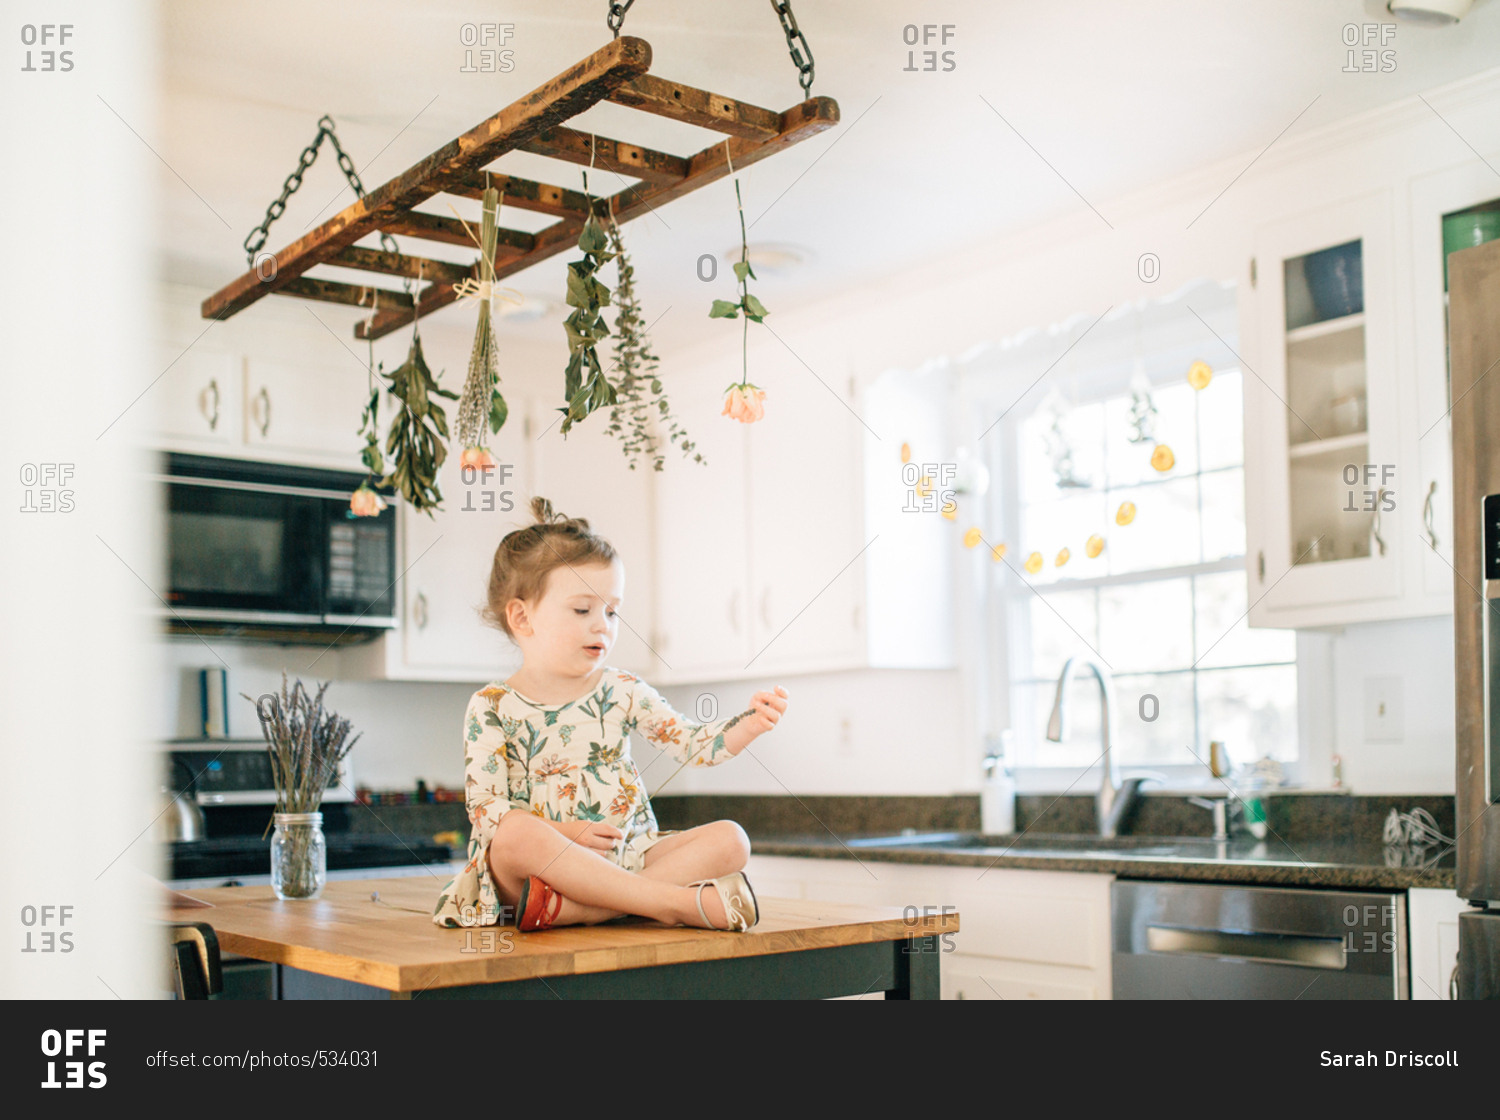 Girl in kitchen looking at lavender